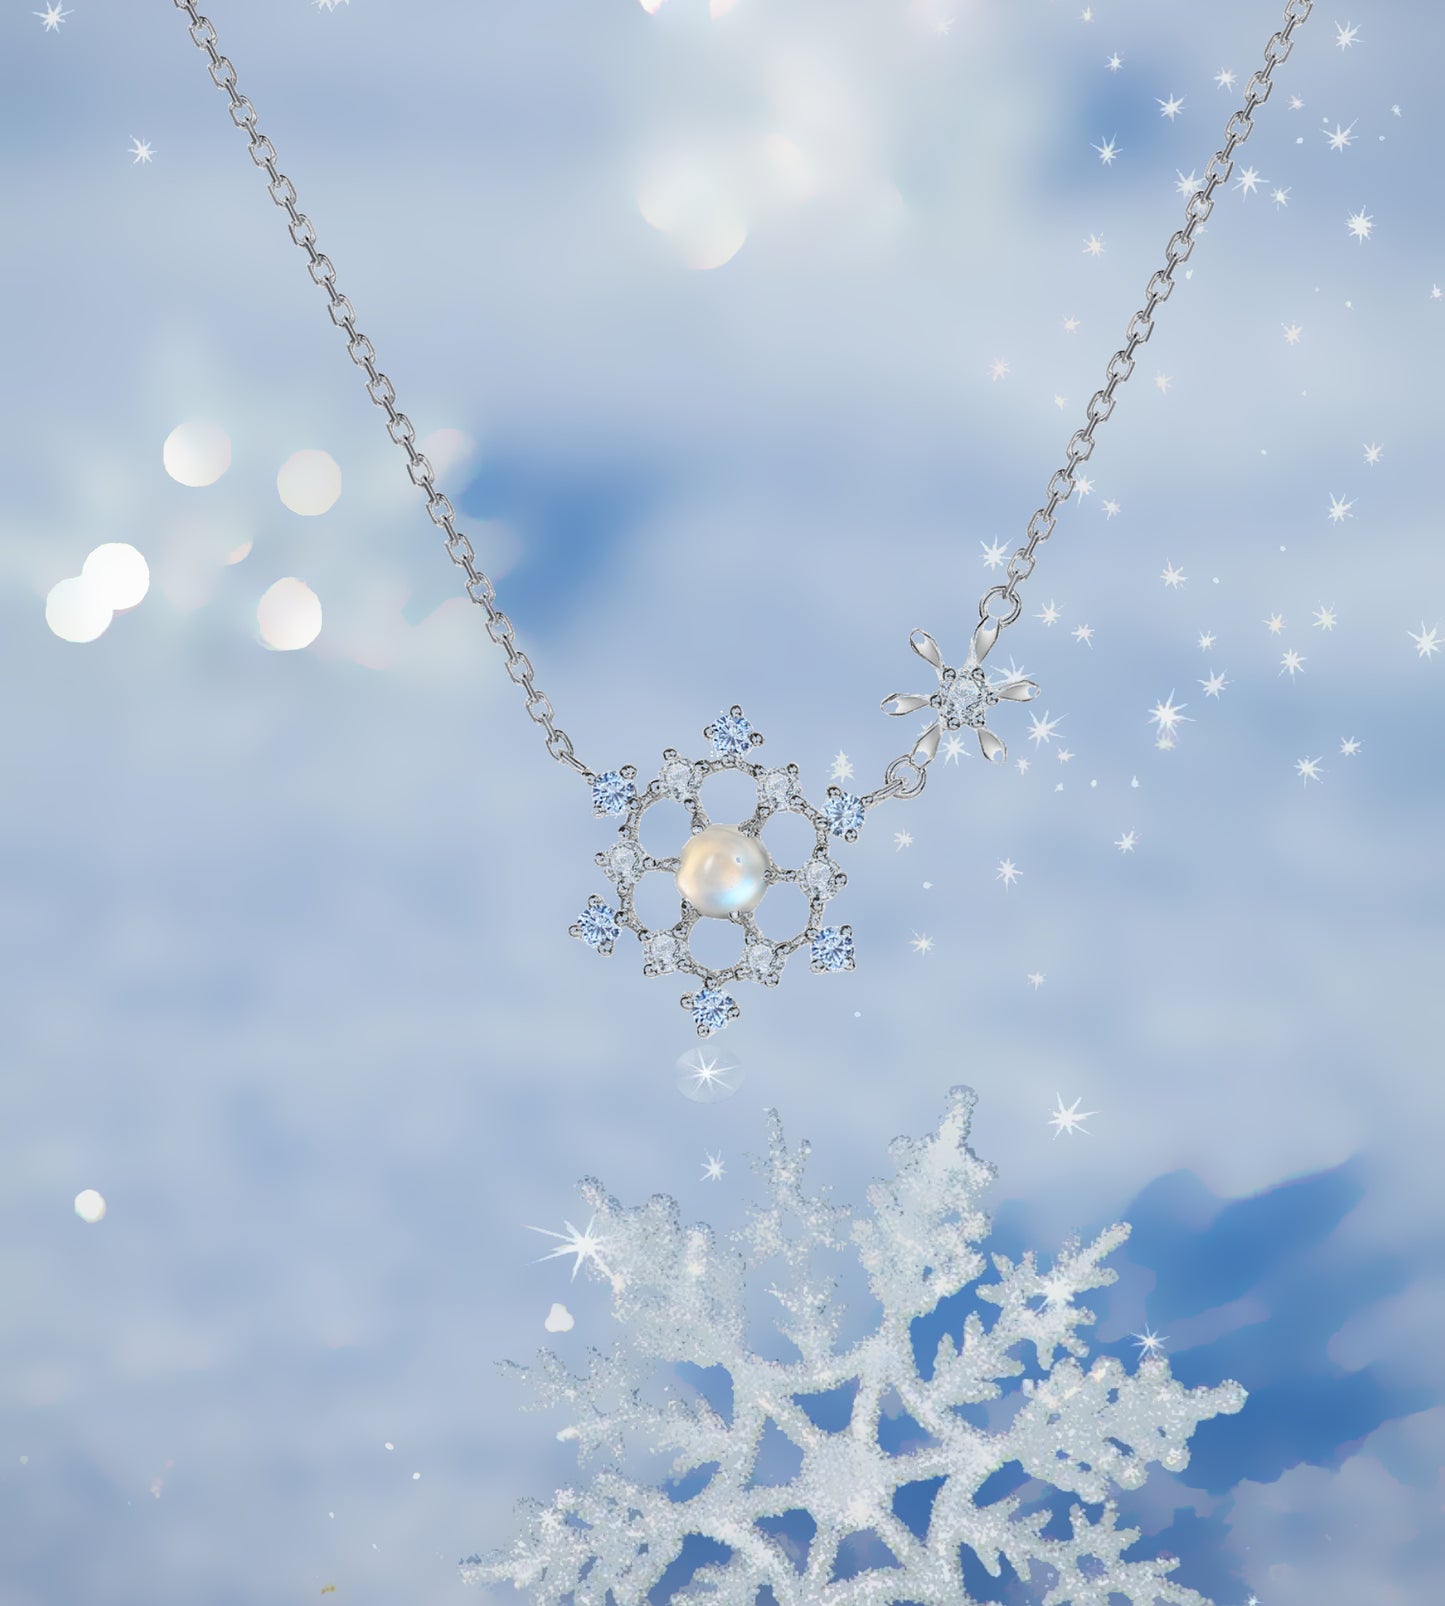 Snowflake Necklace with Moonstone & Cubic Zirconia in Sterling Silver